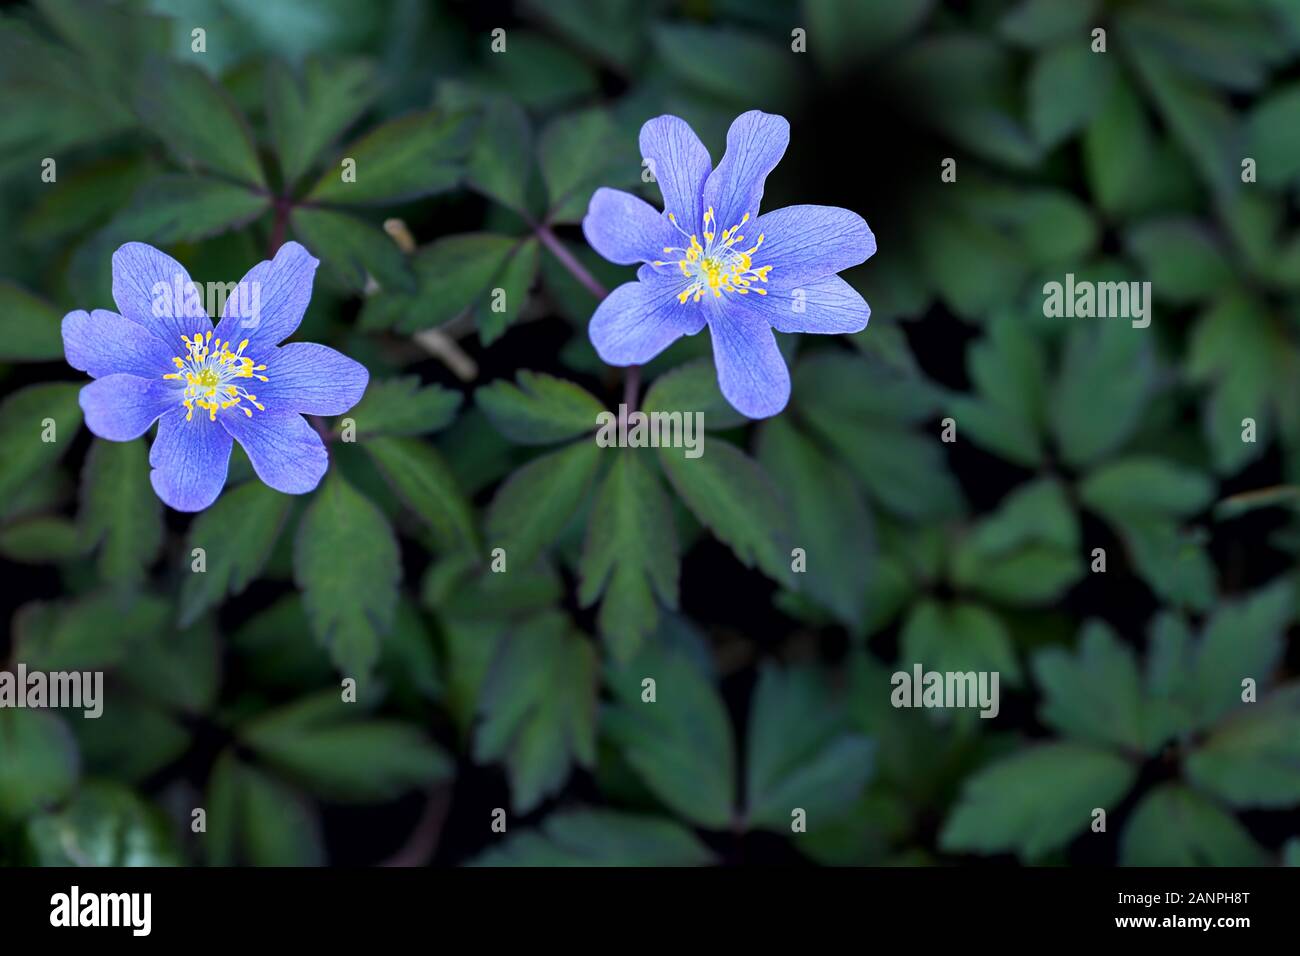 windflowers, light blue anemone petals with  yellow stamens surrounded  by  green leaves Stock Photo